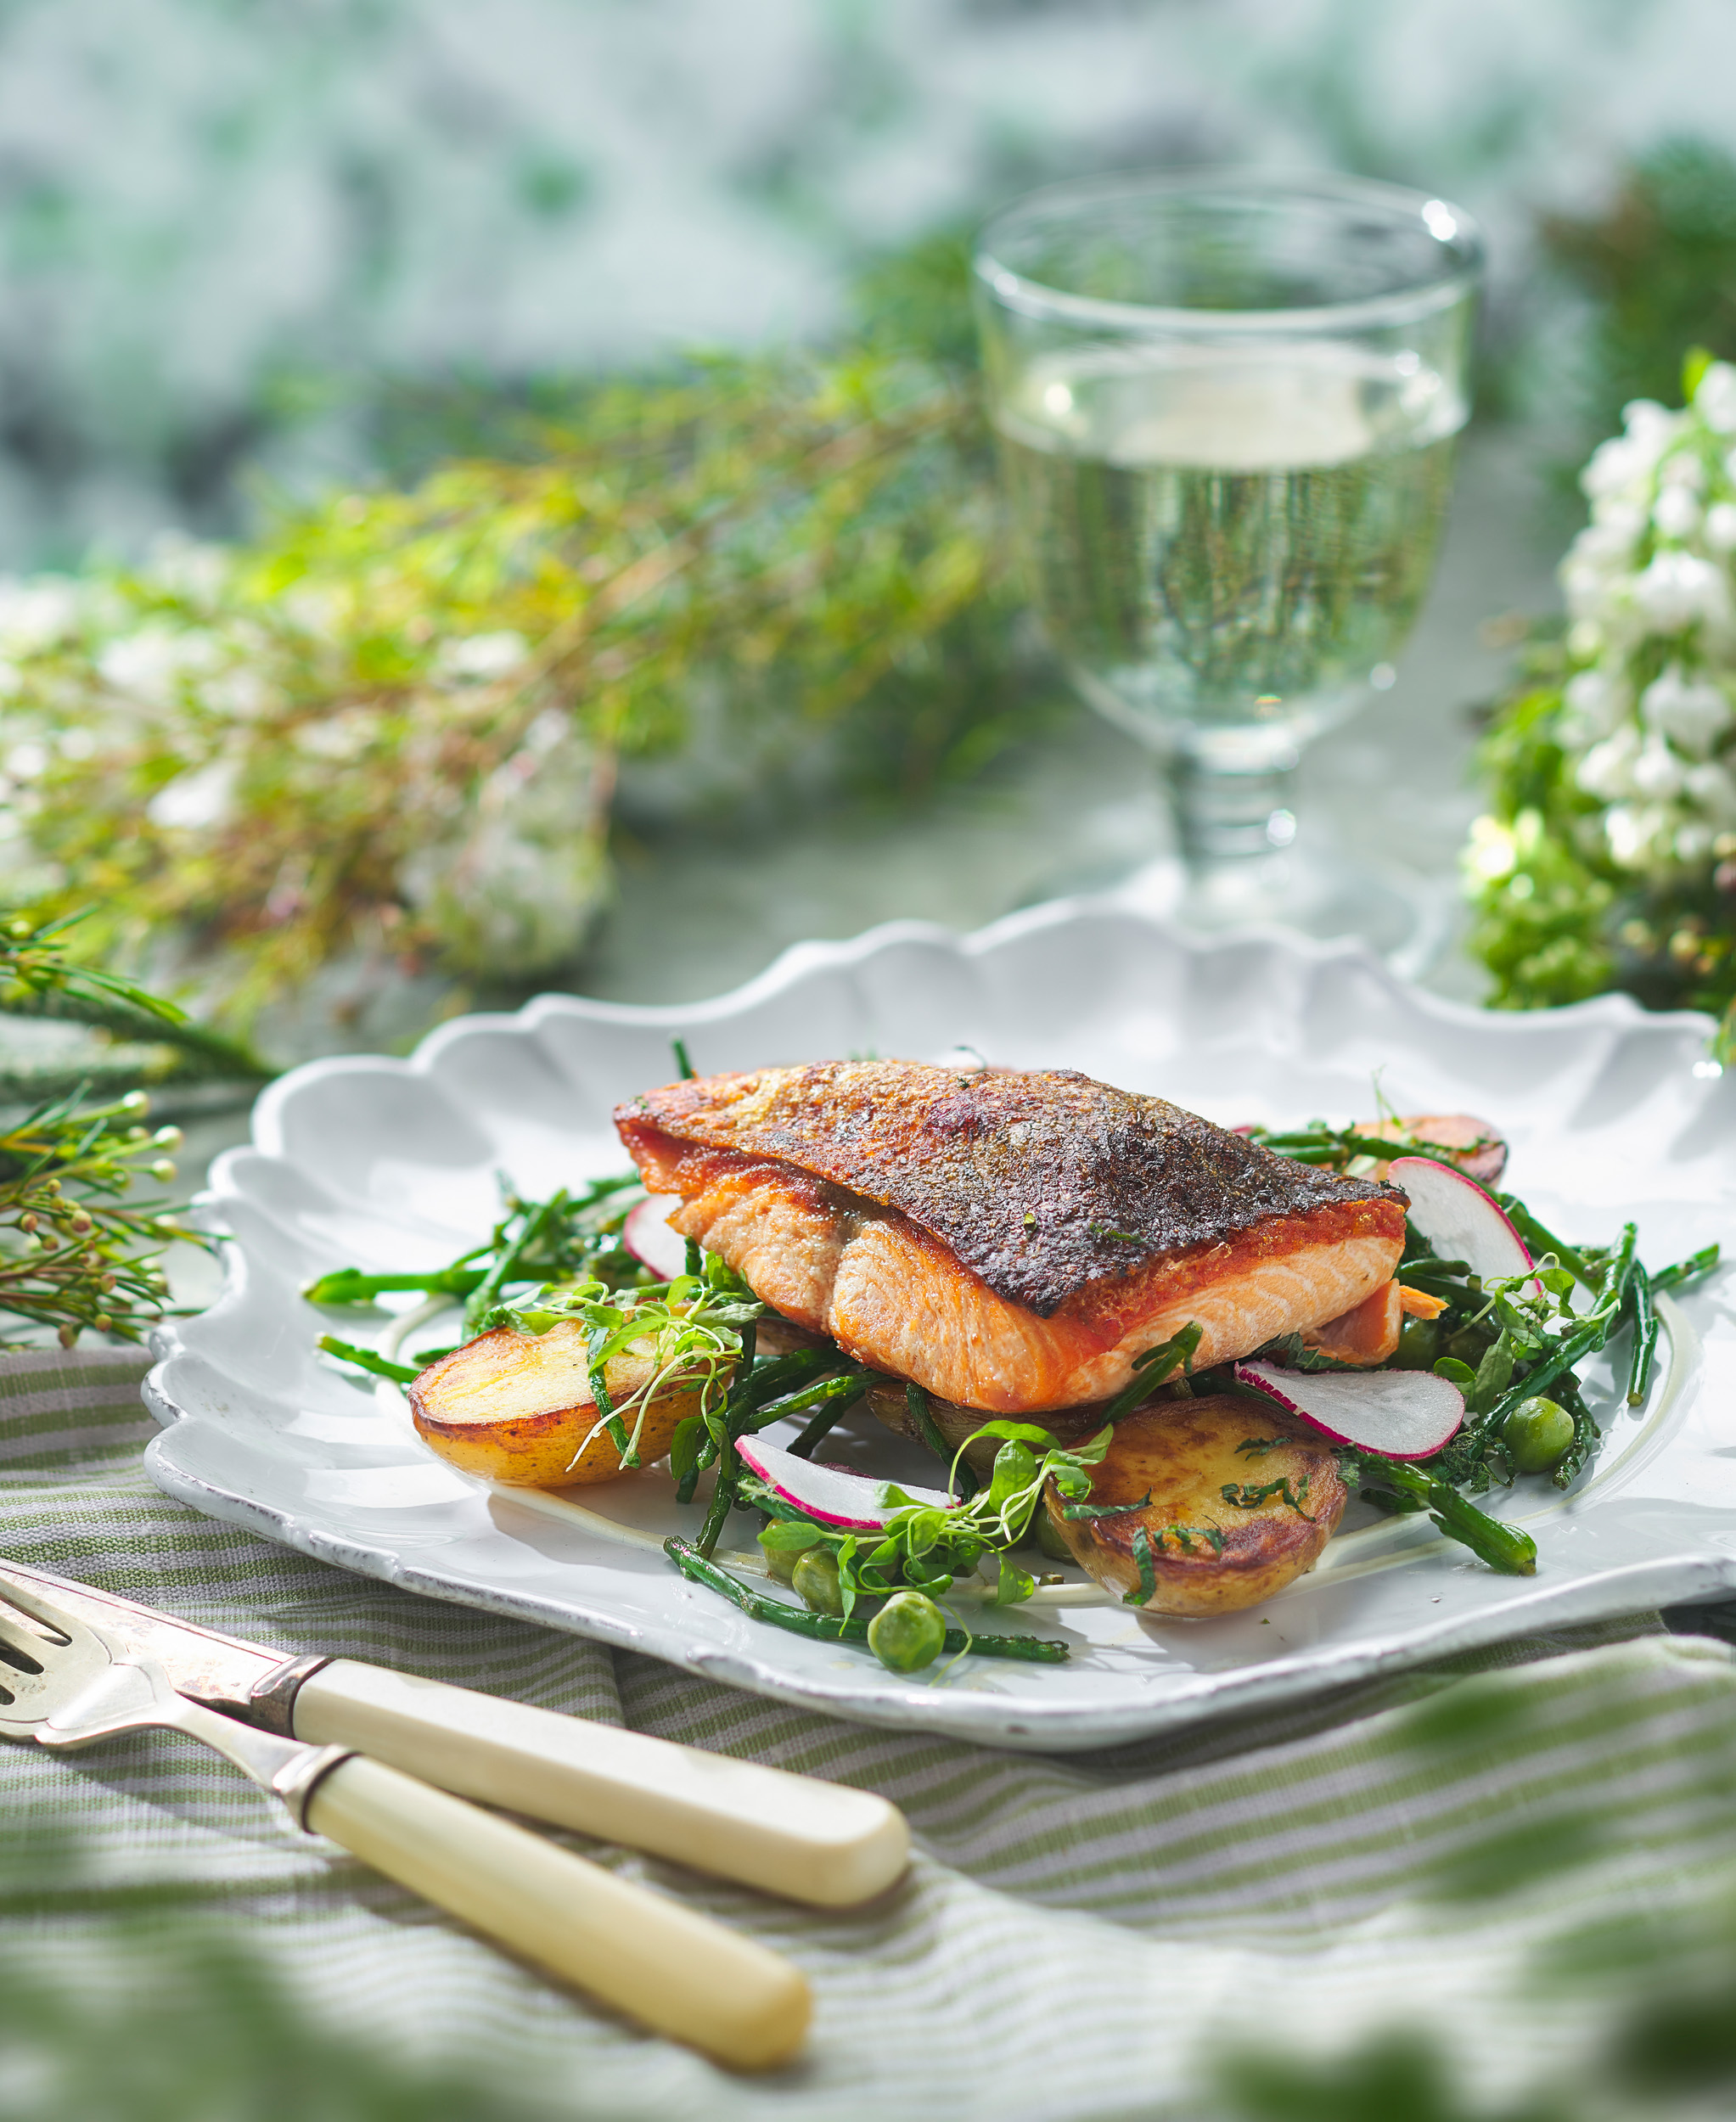 https://www.drakeandmorgan.co.uk/the-parlour/wp-content/uploads/2022/05/Seafood-Trout-3.jpg